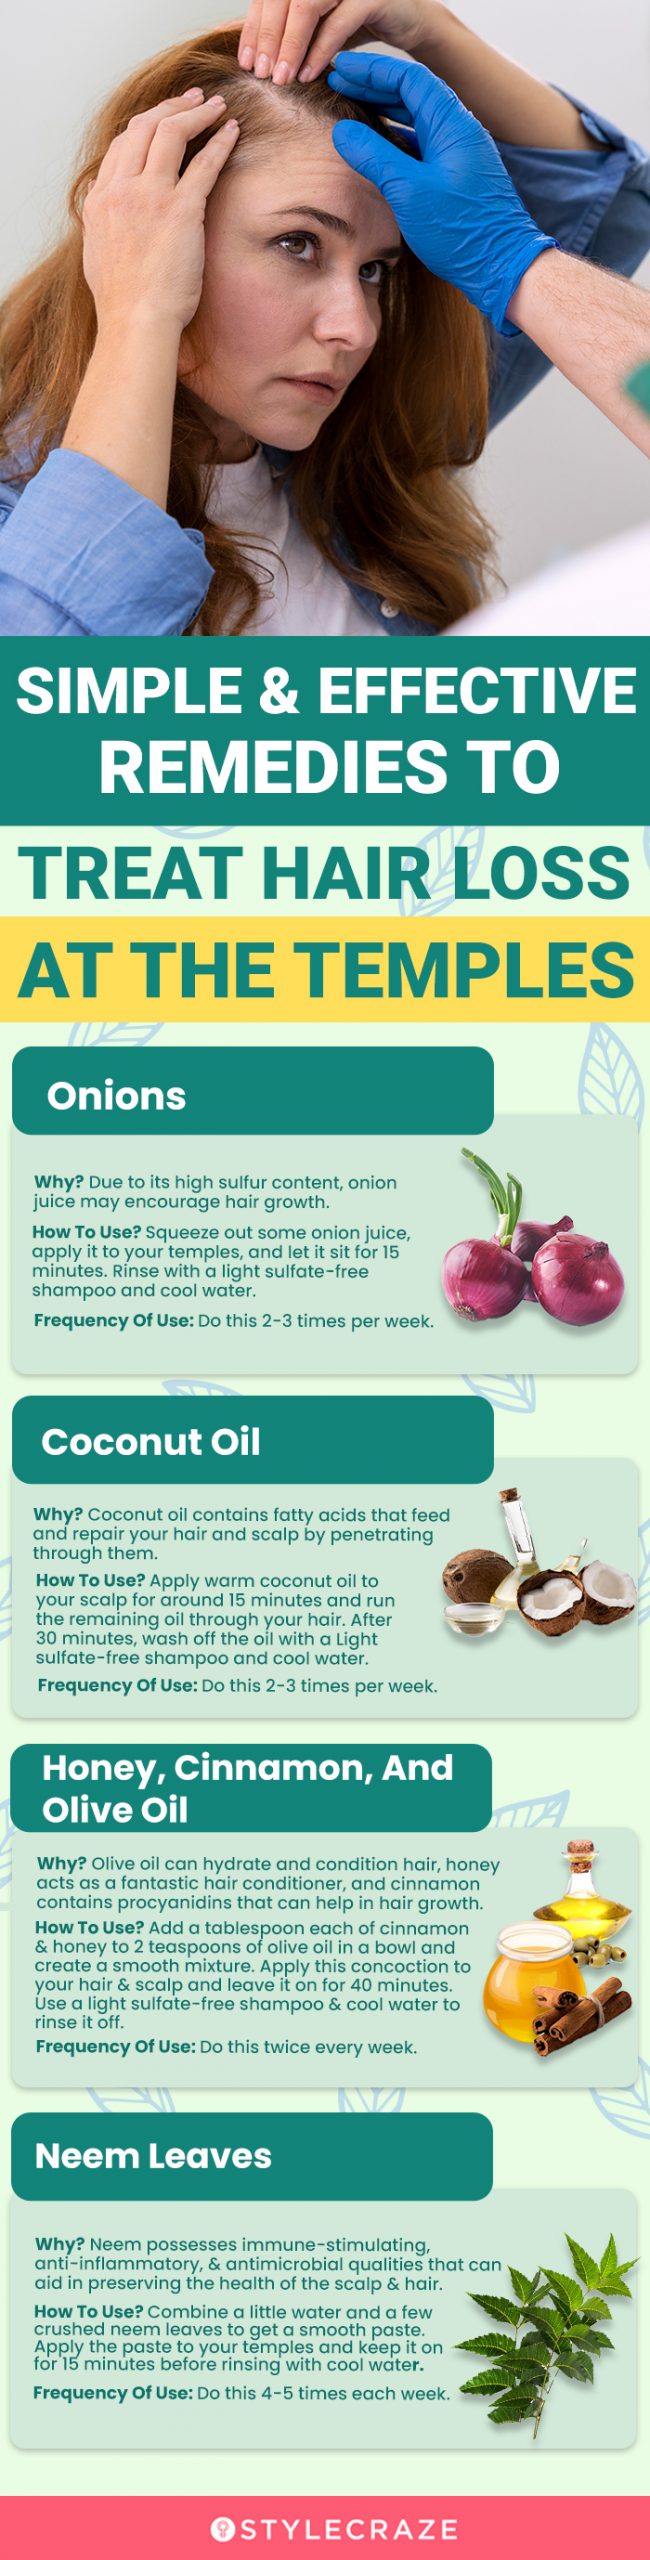 simple and effective remedies to treat hairloss at the temples (infographic)